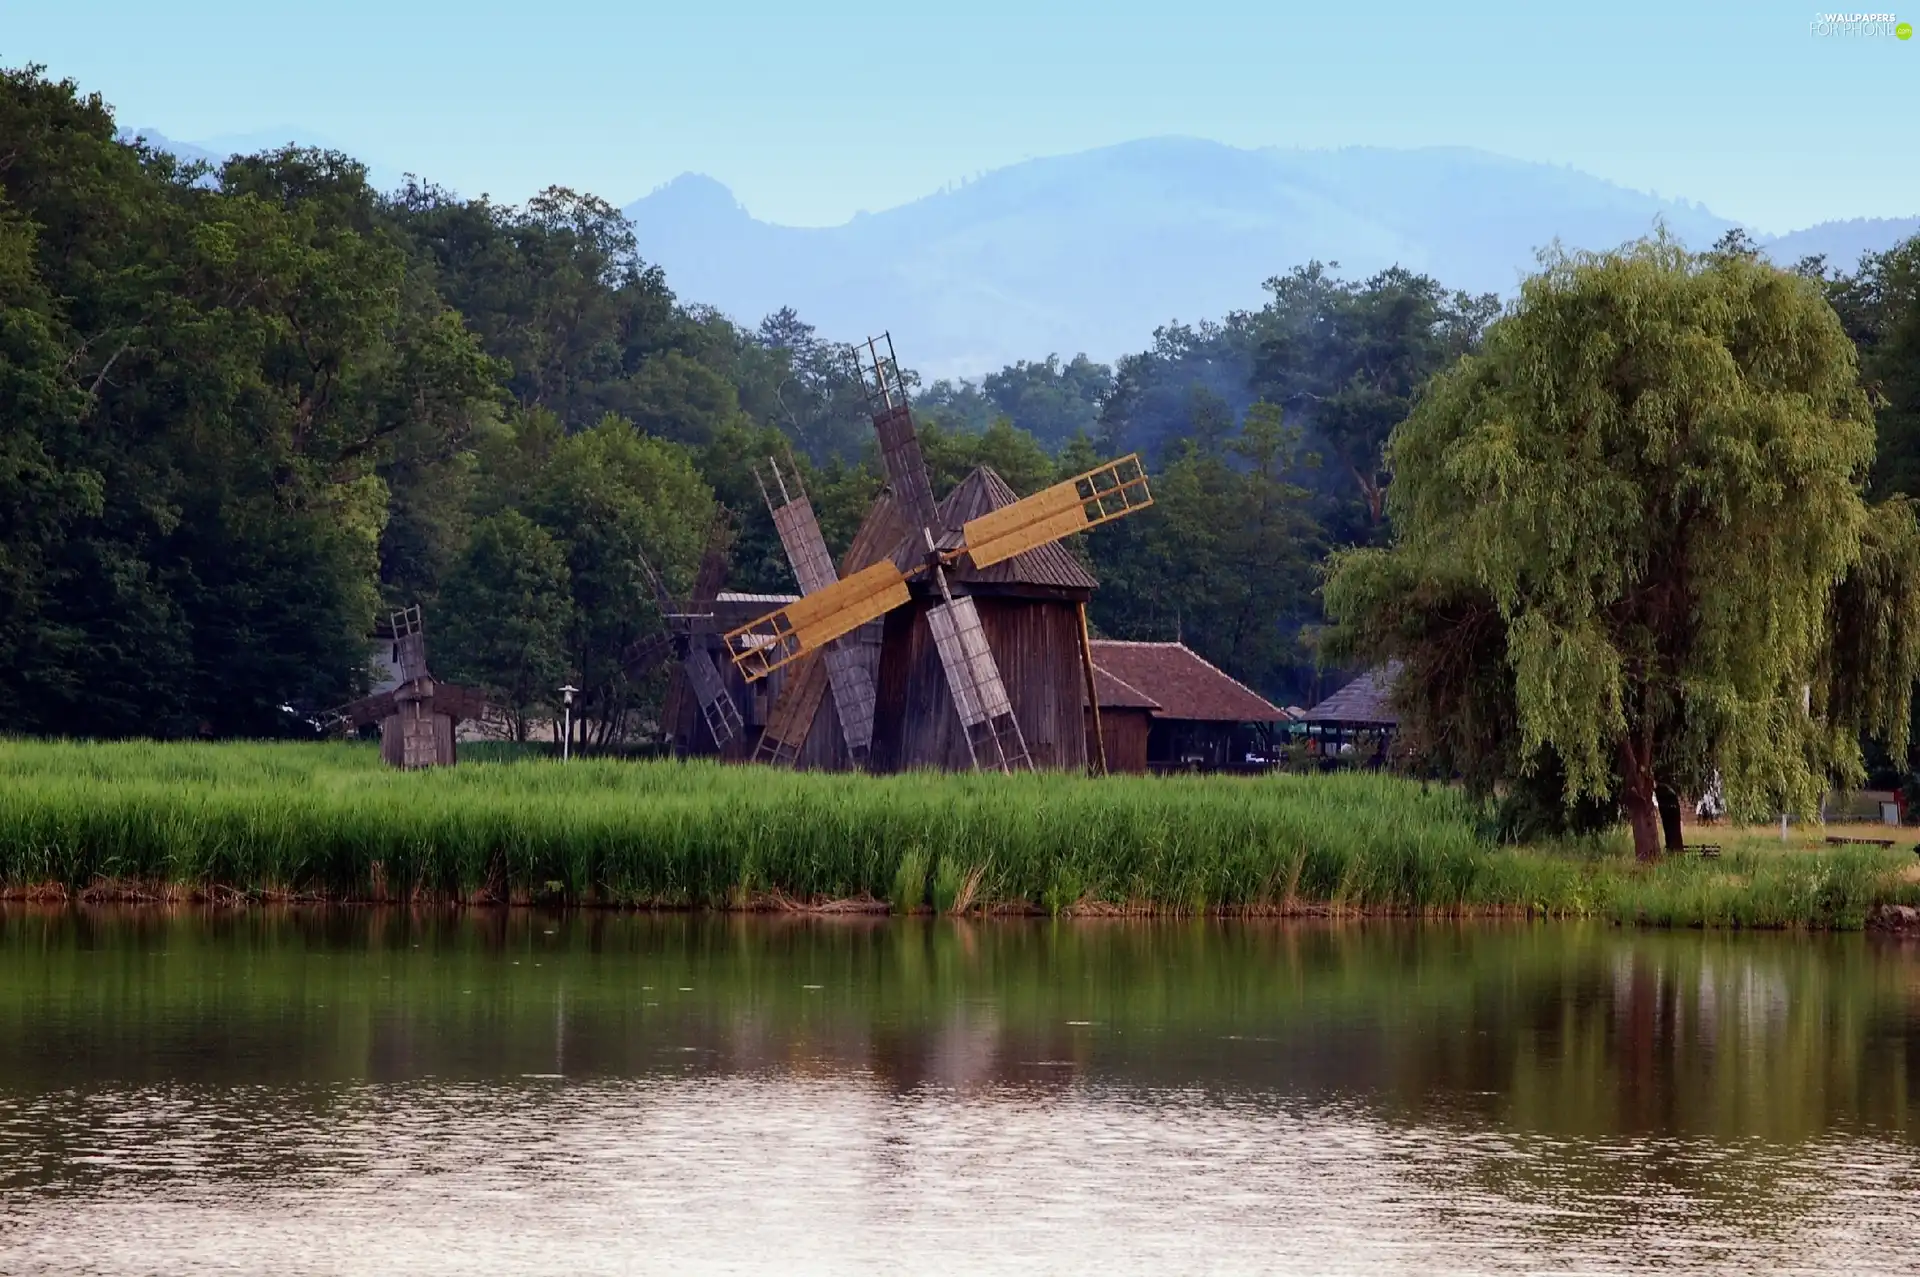 grass, Windmills, trees, viewes, River